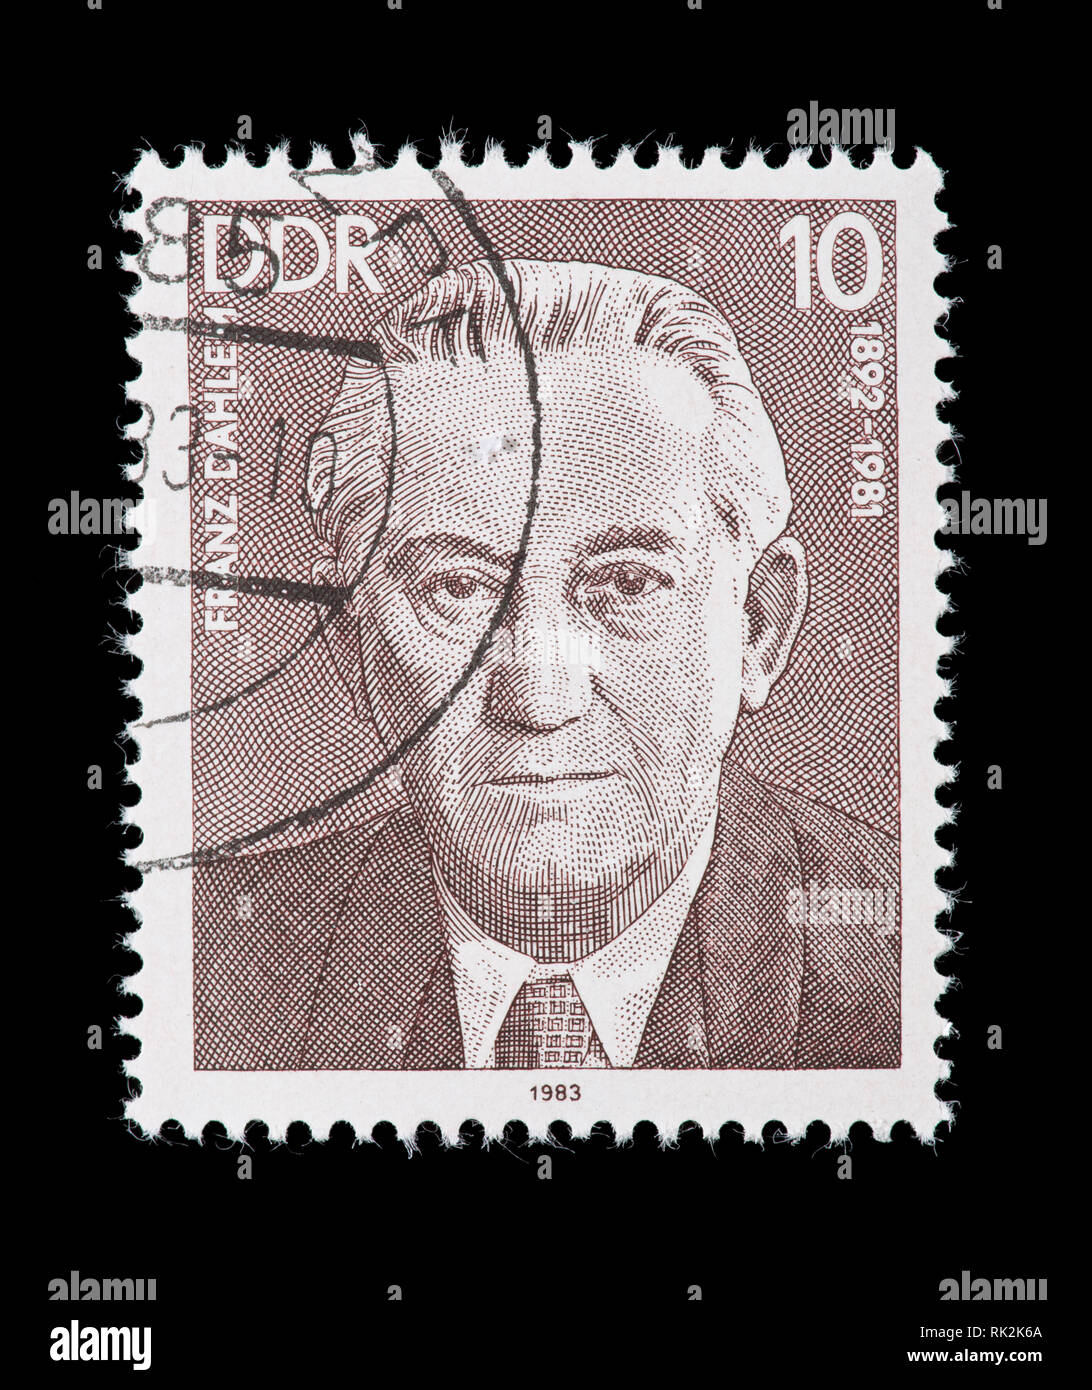 Postage stamp from East Germany (DDR) depicting Franz Dahlem, politician and leader of the East German Communist Party. Stock Photo